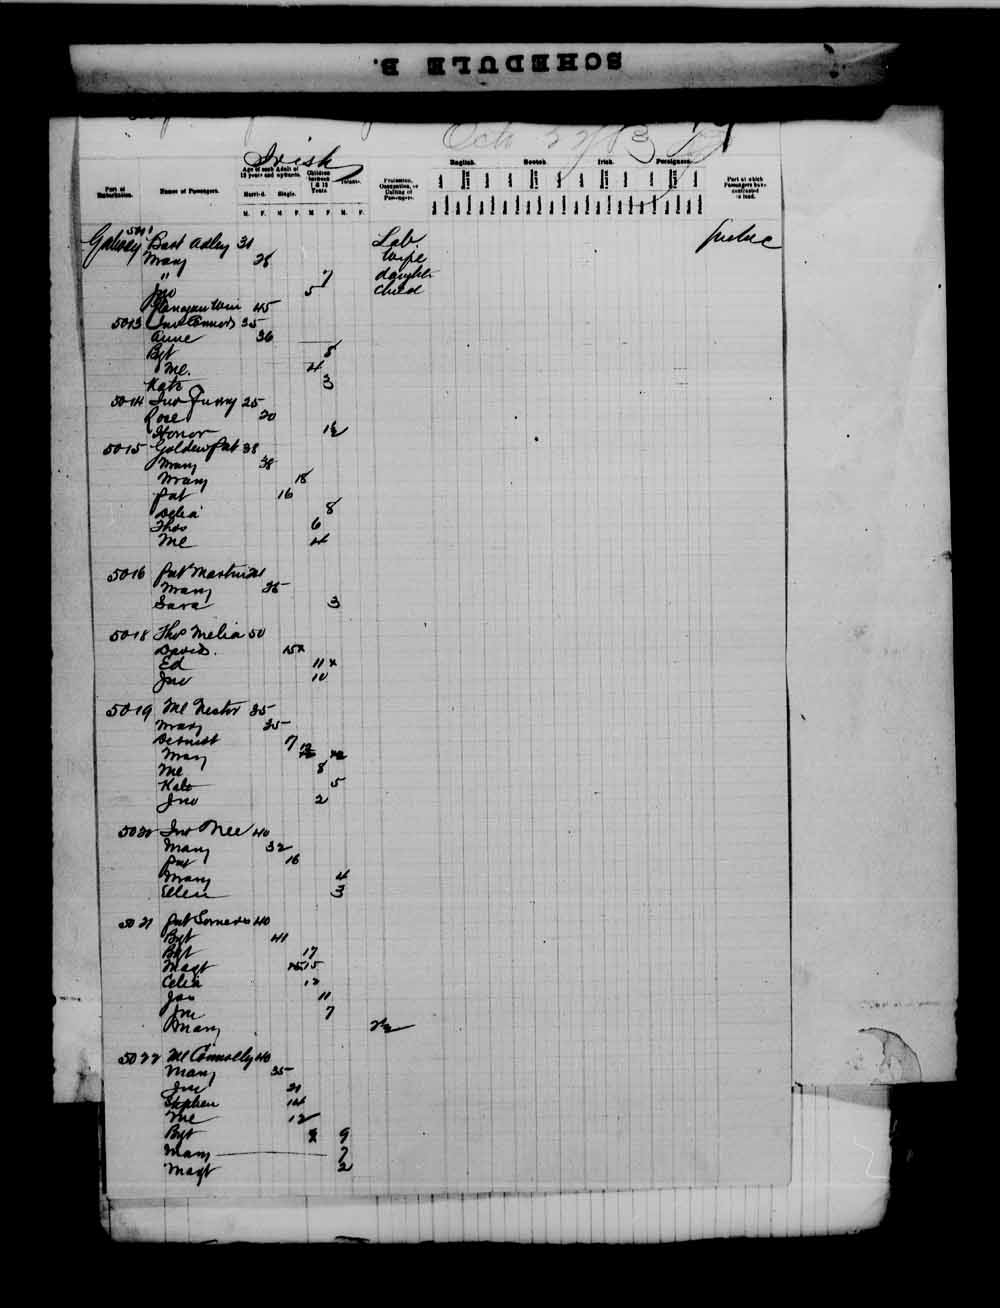 Digitized page of Passenger Lists for Image No.: e003543410